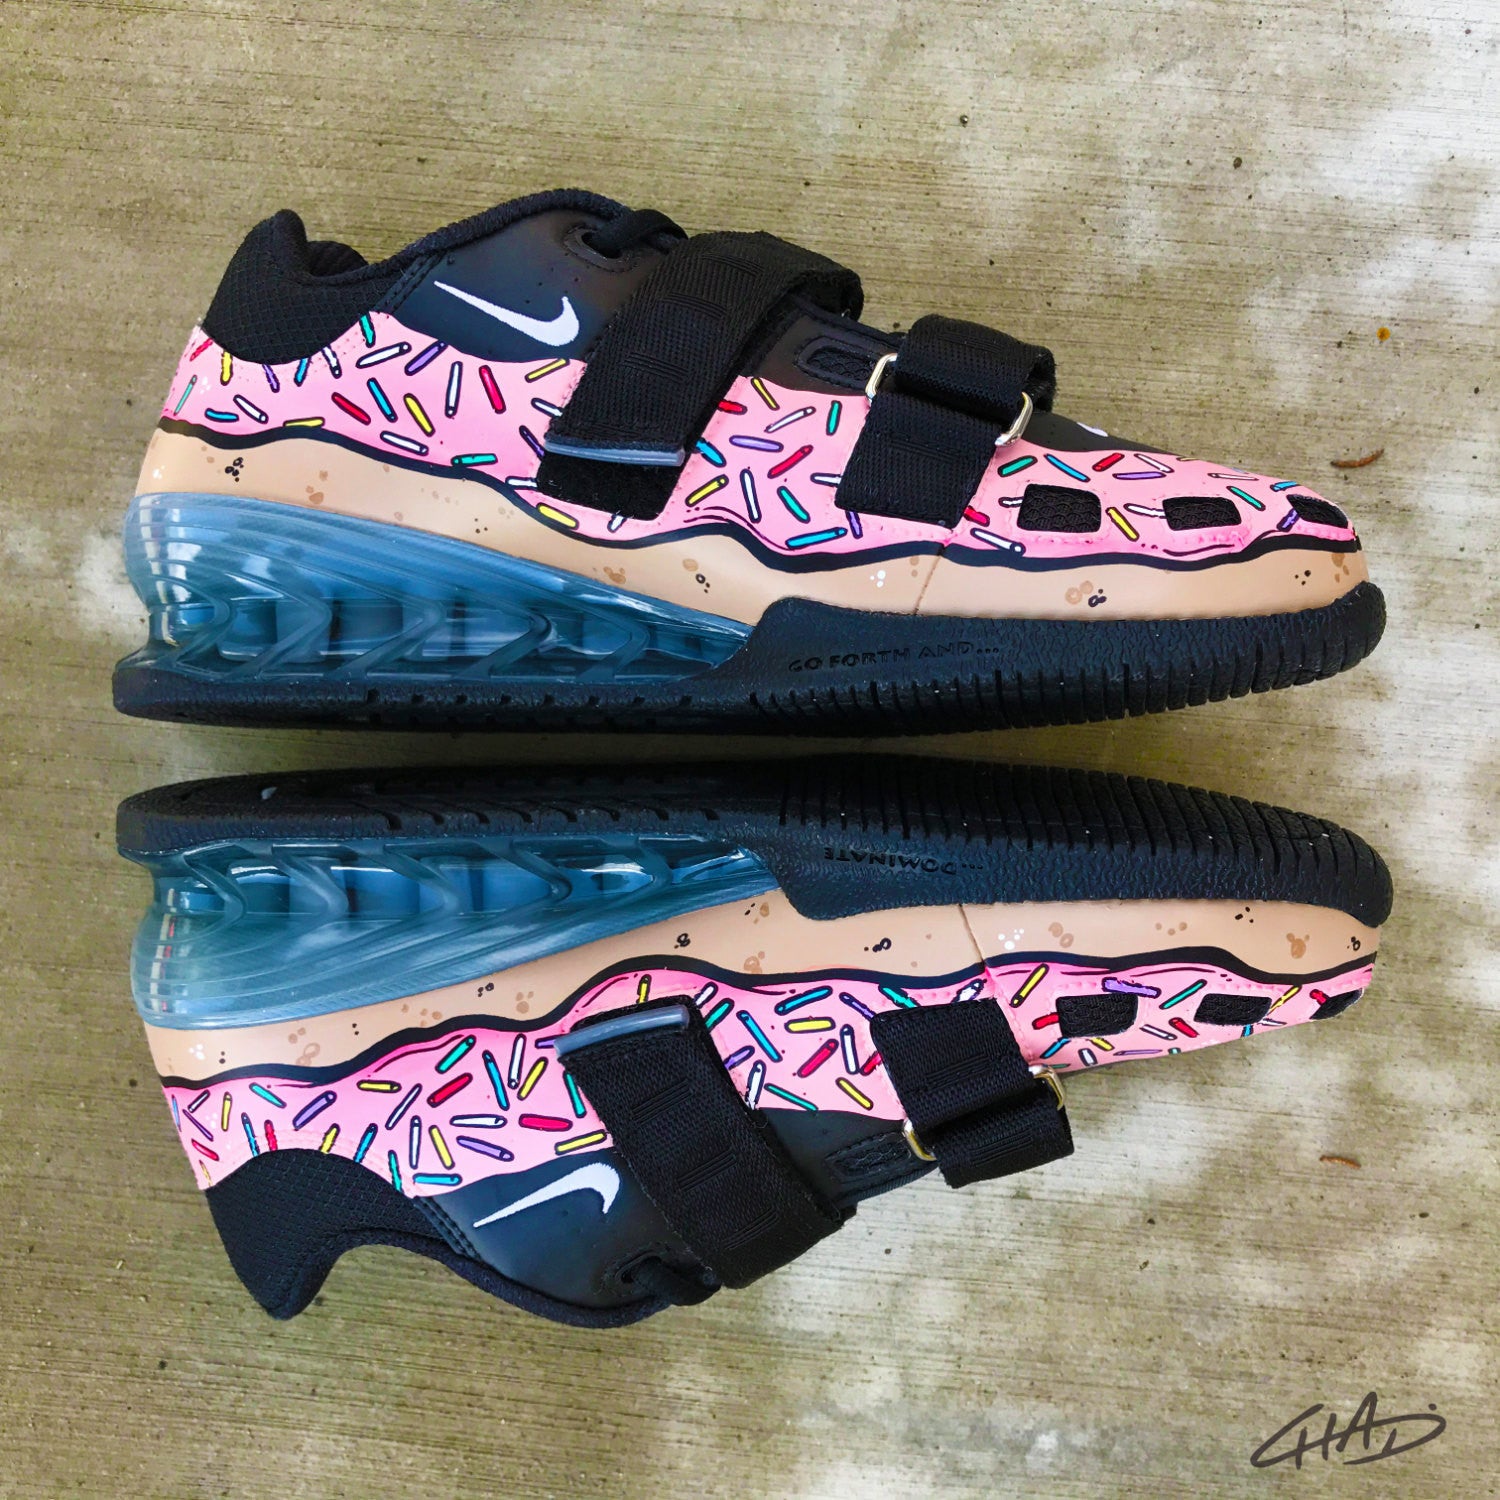 Que agradable Optimista alineación Custom pink sprinkled donut Hand painted Nike Romaleos olympic weightl –  chadcantcolor